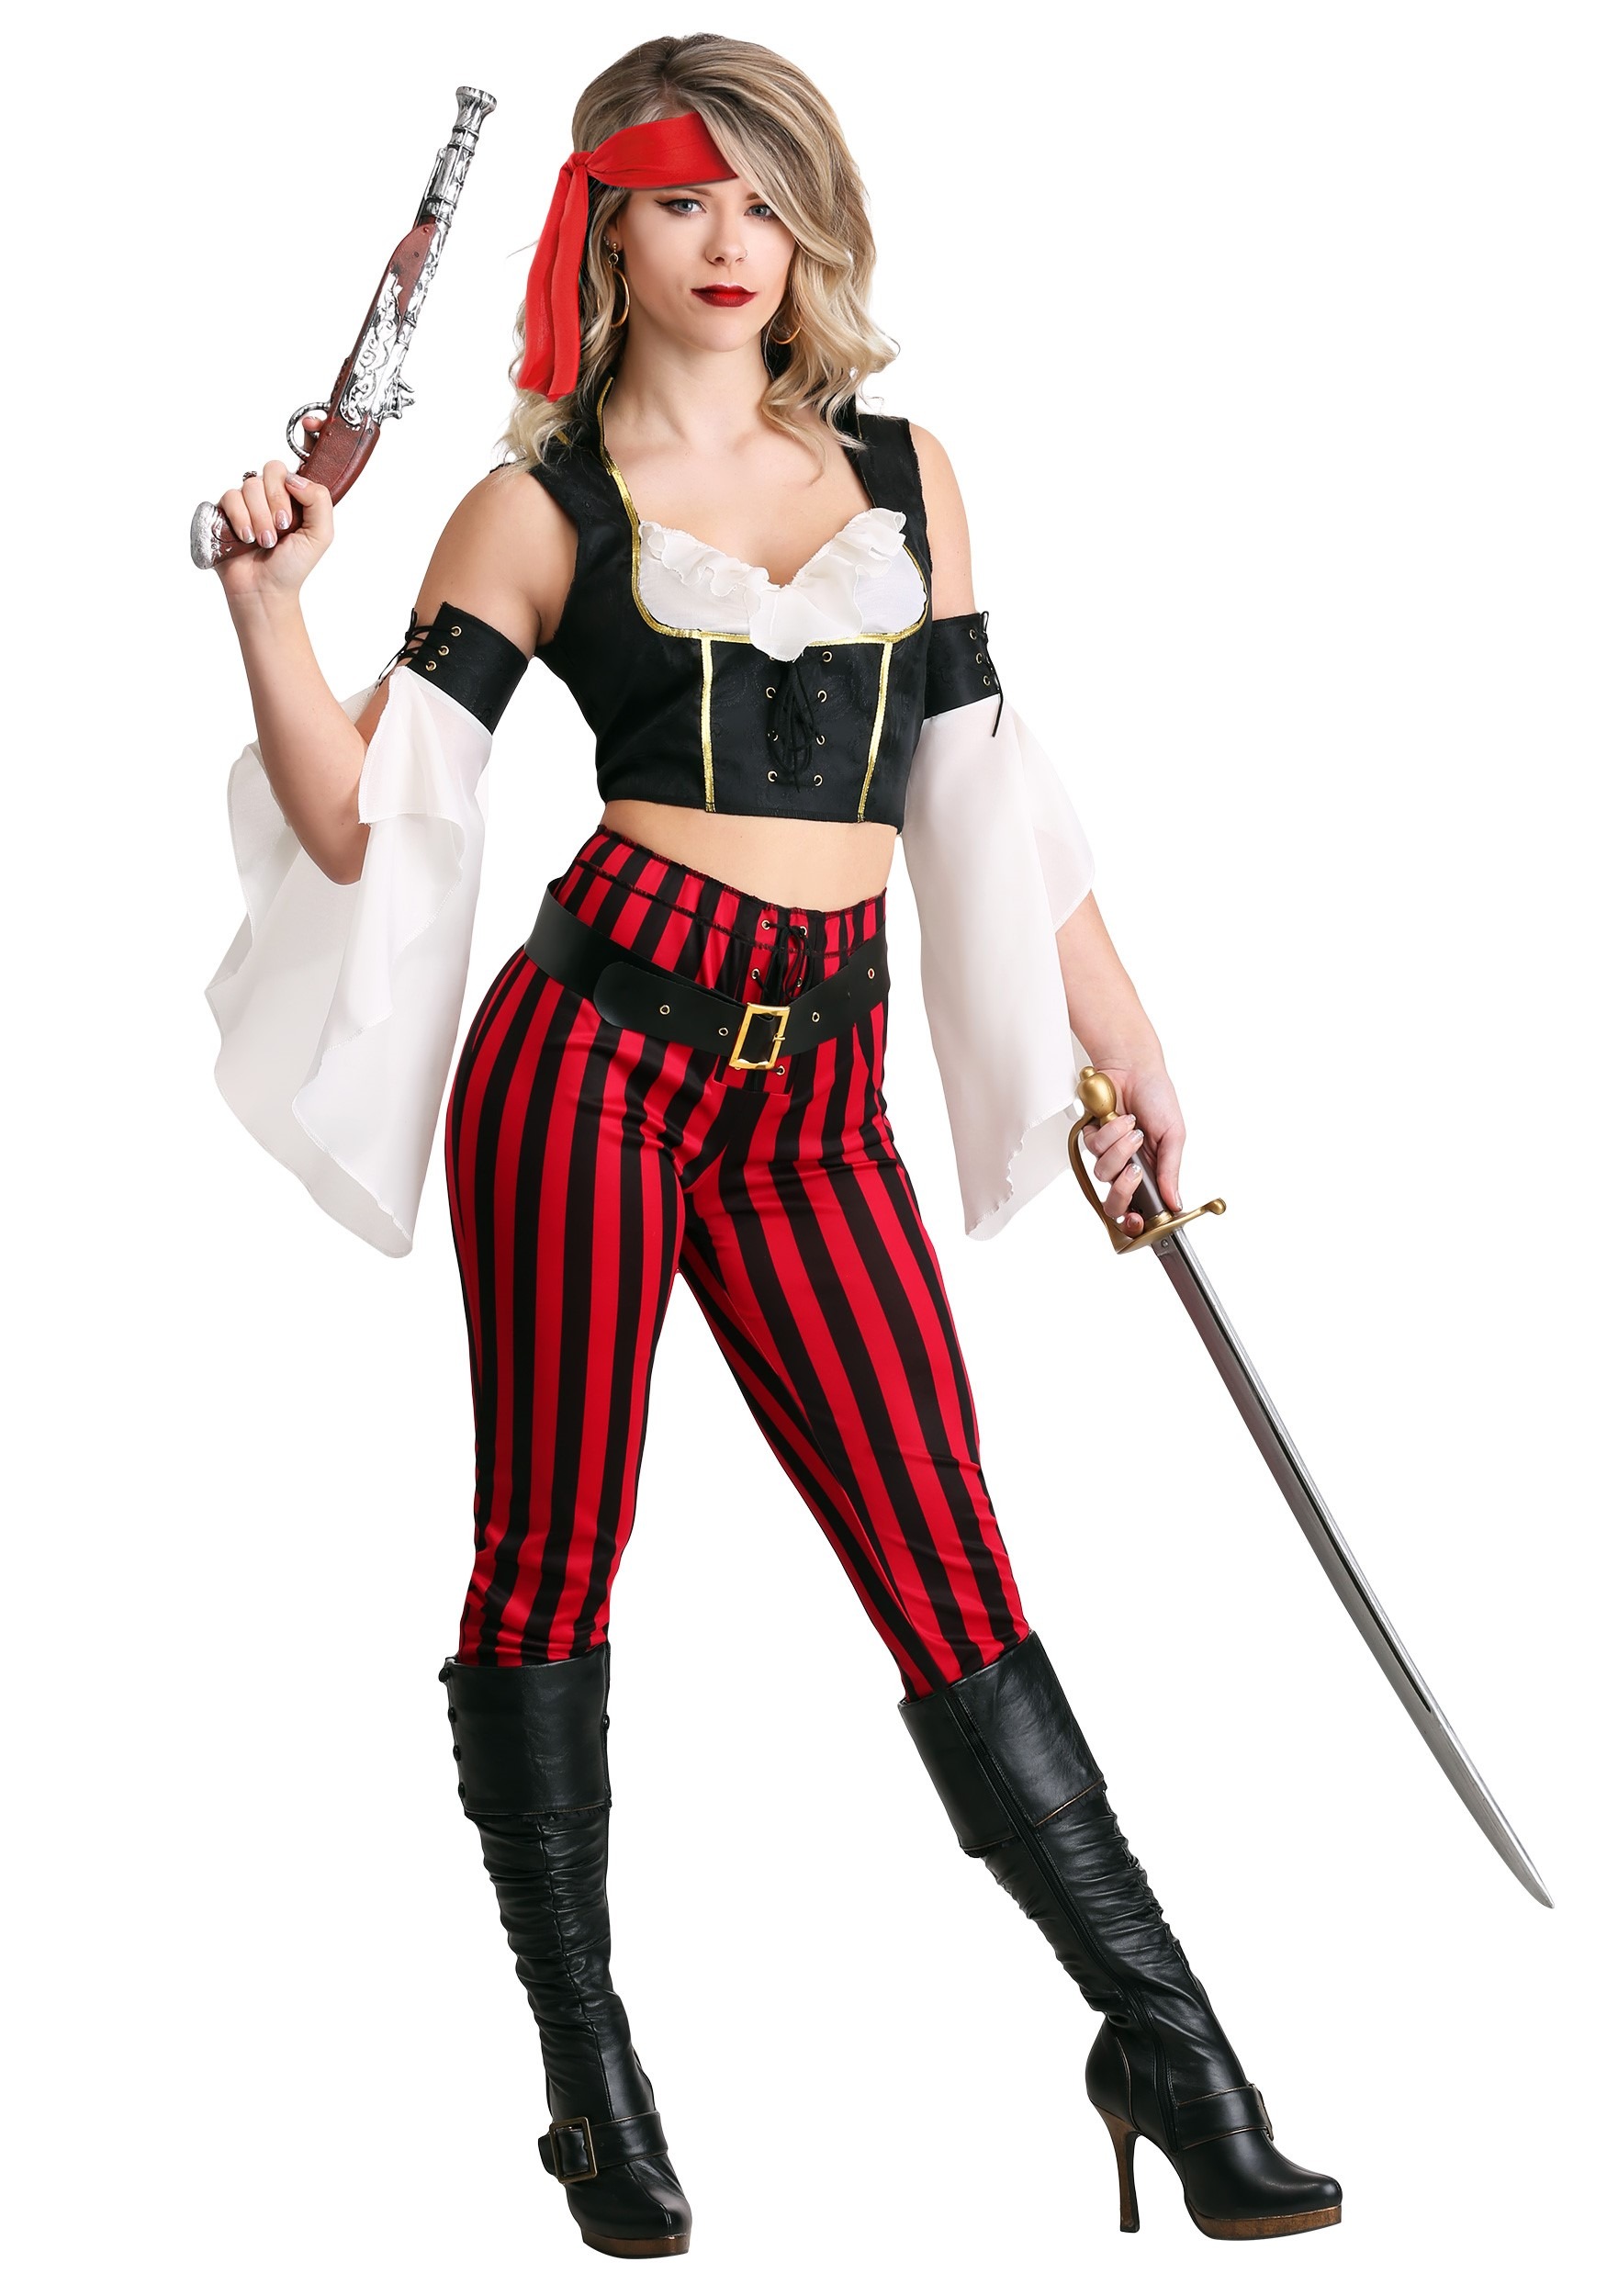 homemade pirate costume adult Sex Images Hq